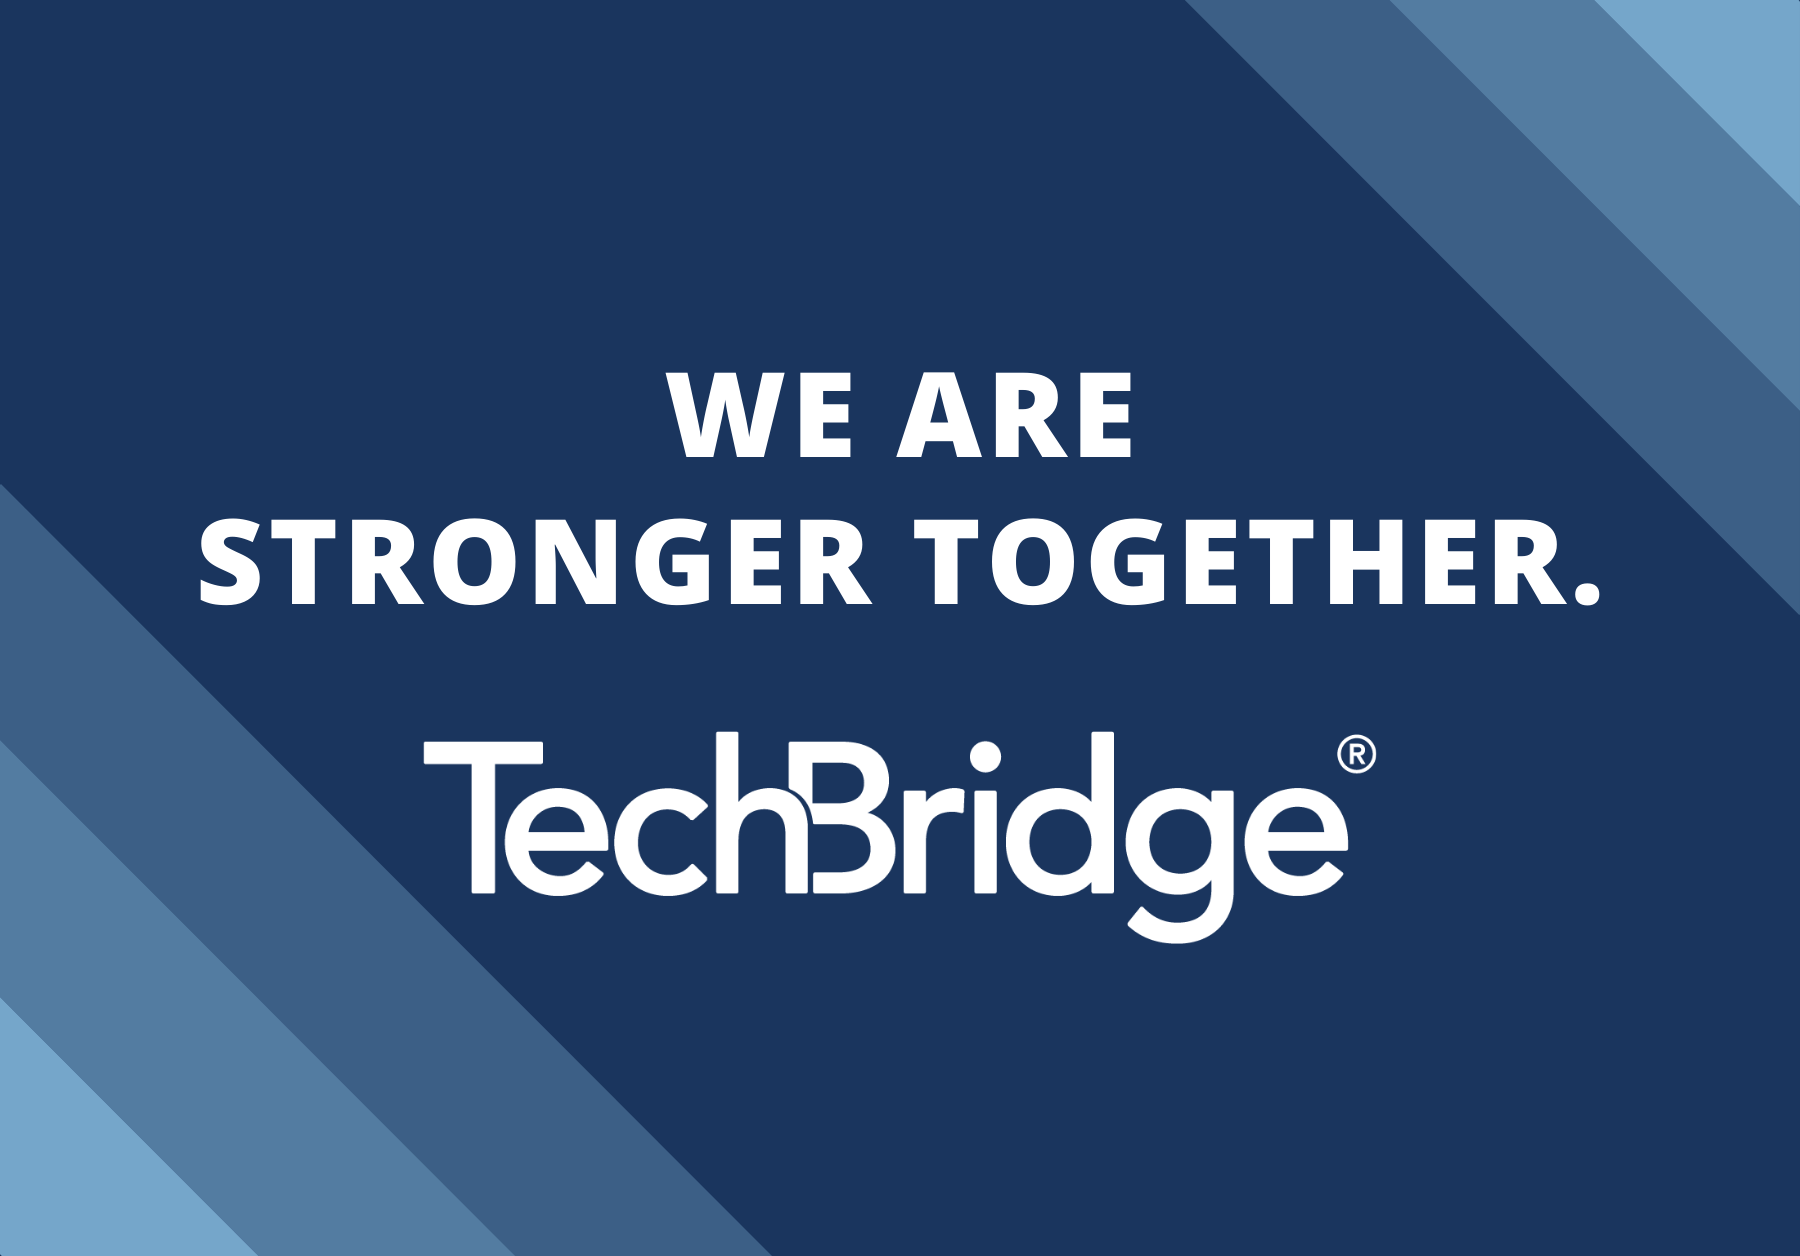 We are stronger together TechBridge